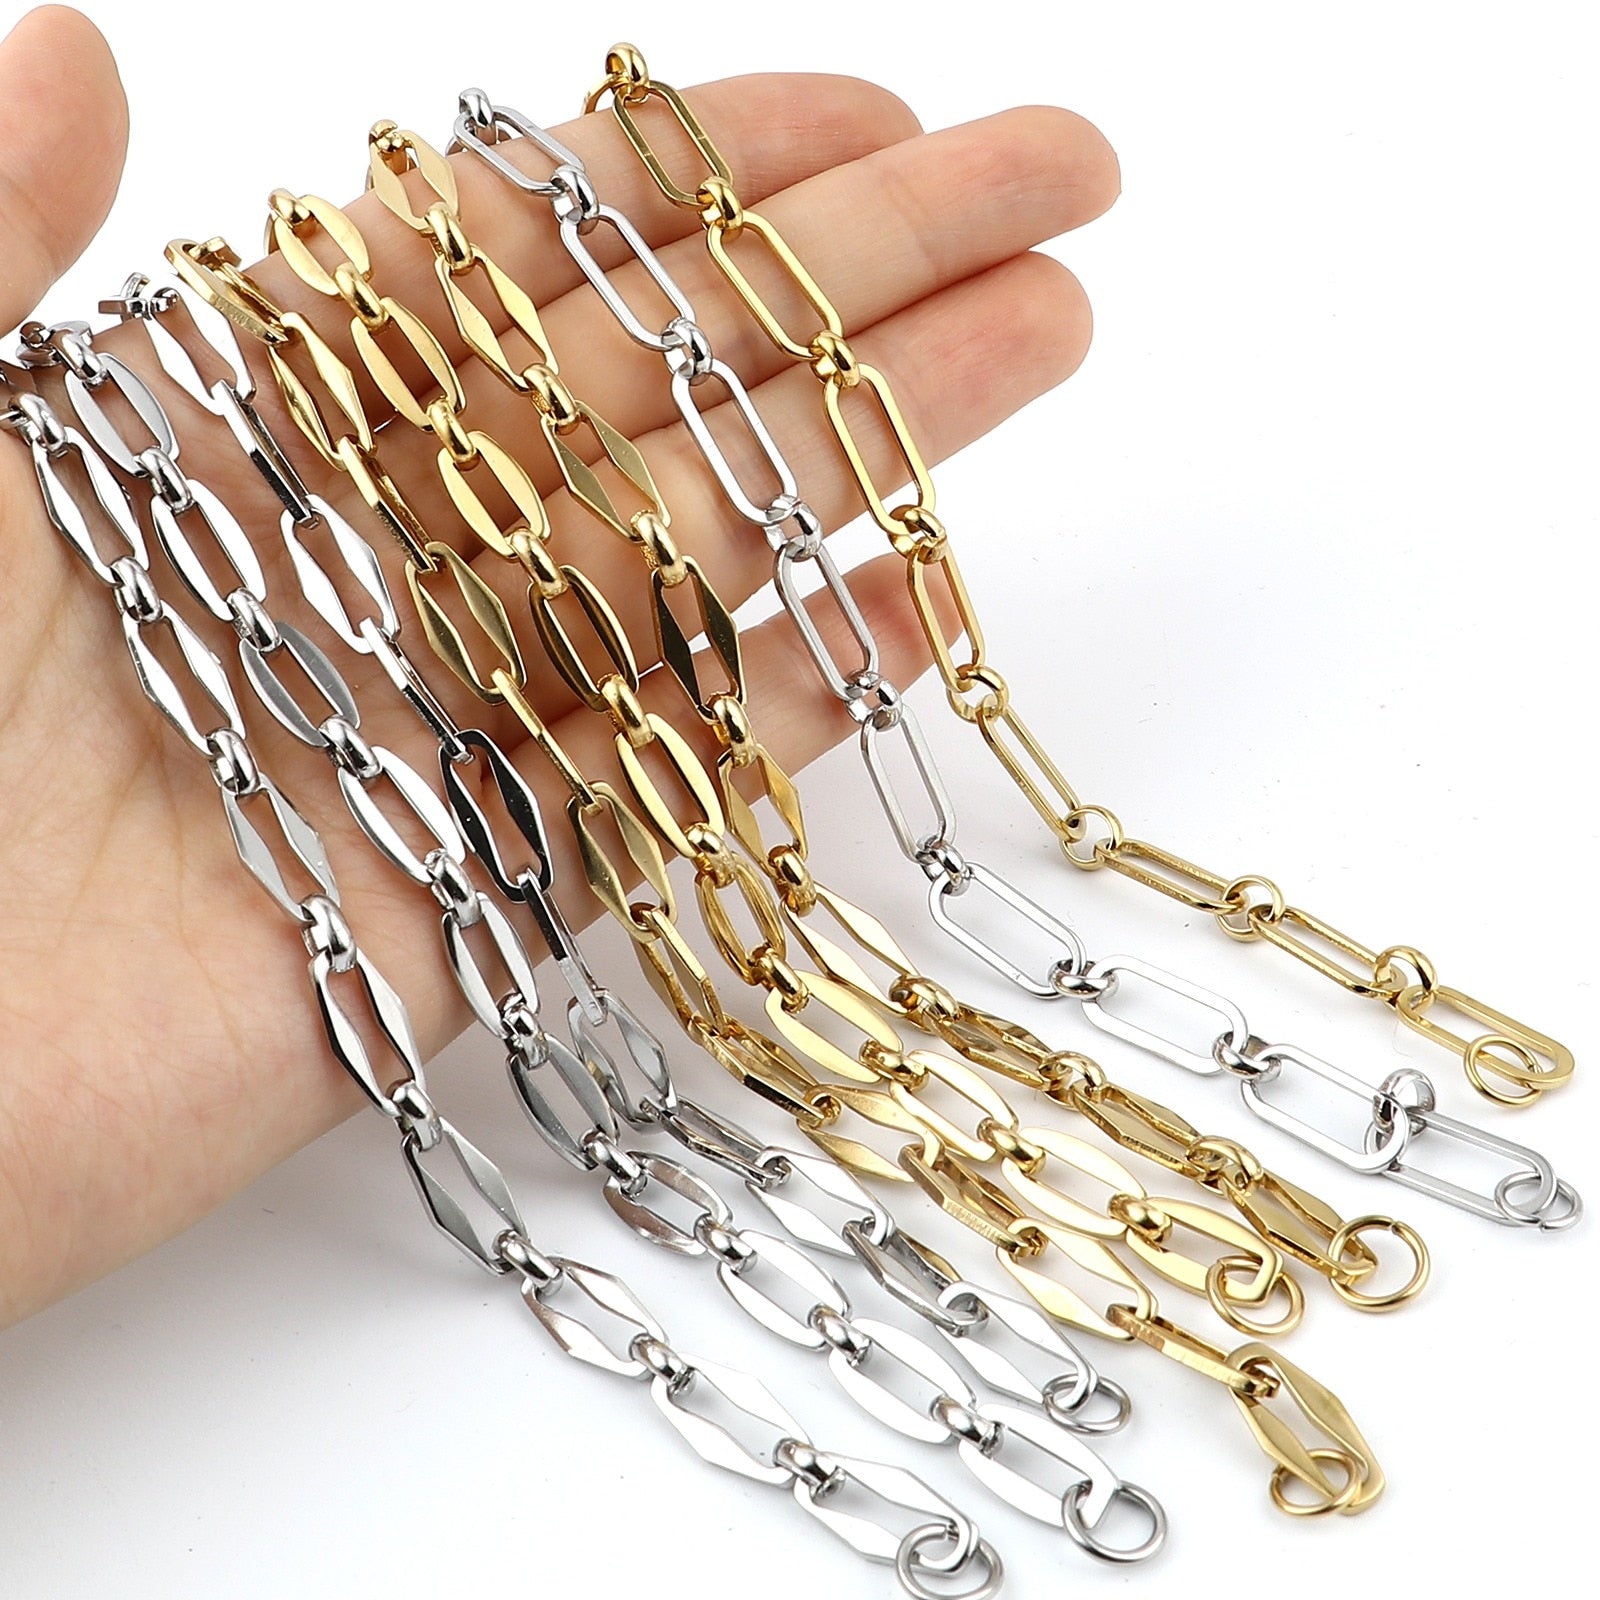 New 304 Stainless Steel Link Cable Chain Bracelets For Women